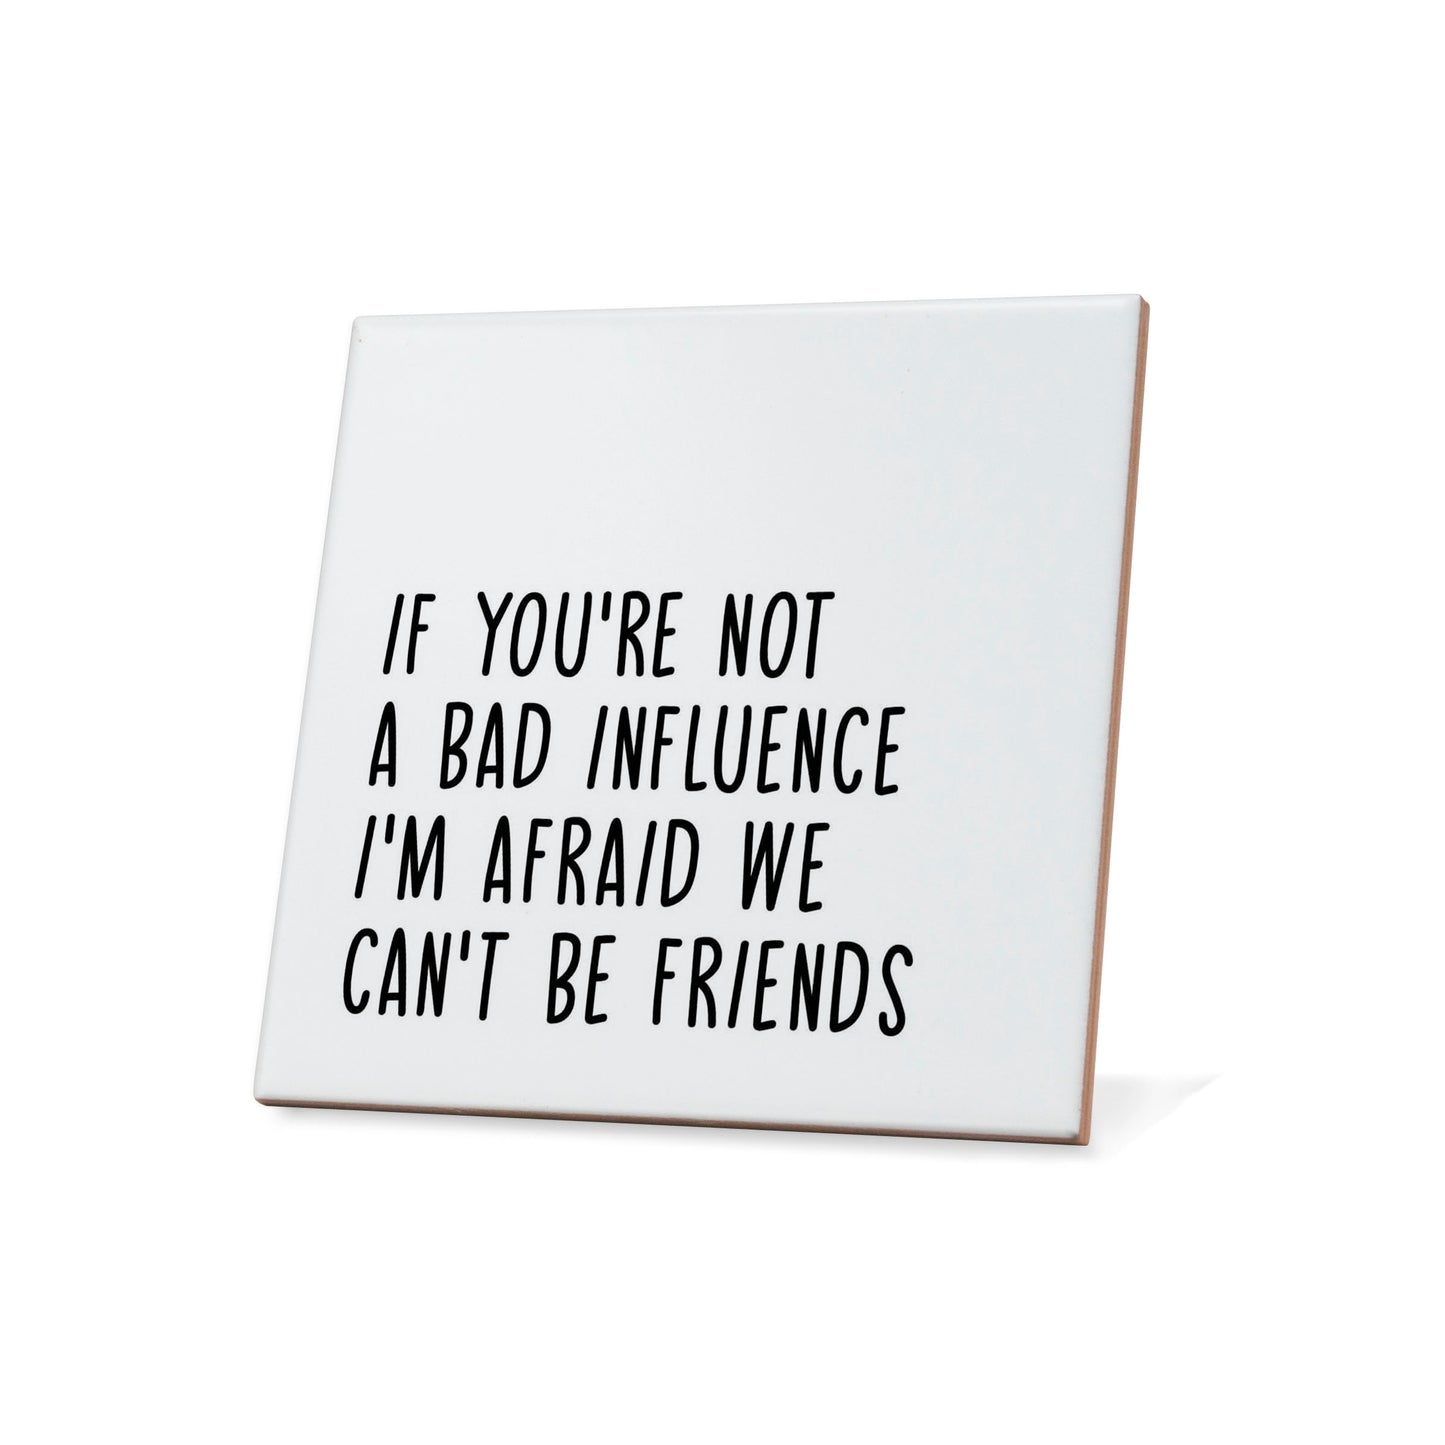 If you're not a bad influence I'm afraid we can't be friends Quote Coaster